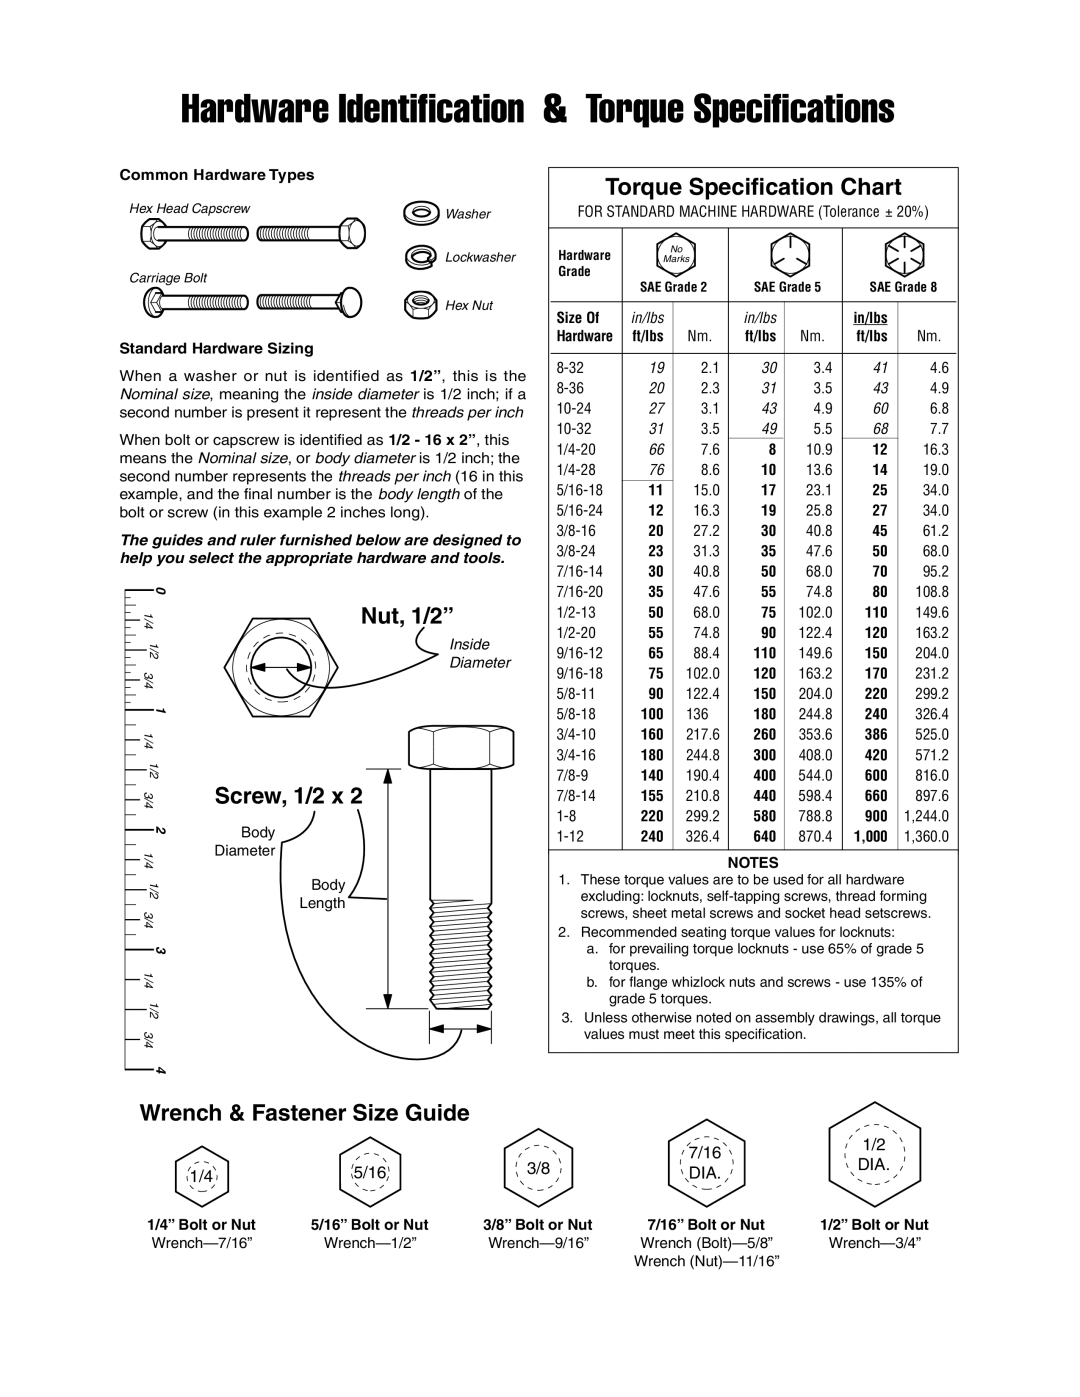 Snapper 4577 Wrench & Fastener Size Guide, Hardware Identification & Torque Specifications, Torque Specification Chart 